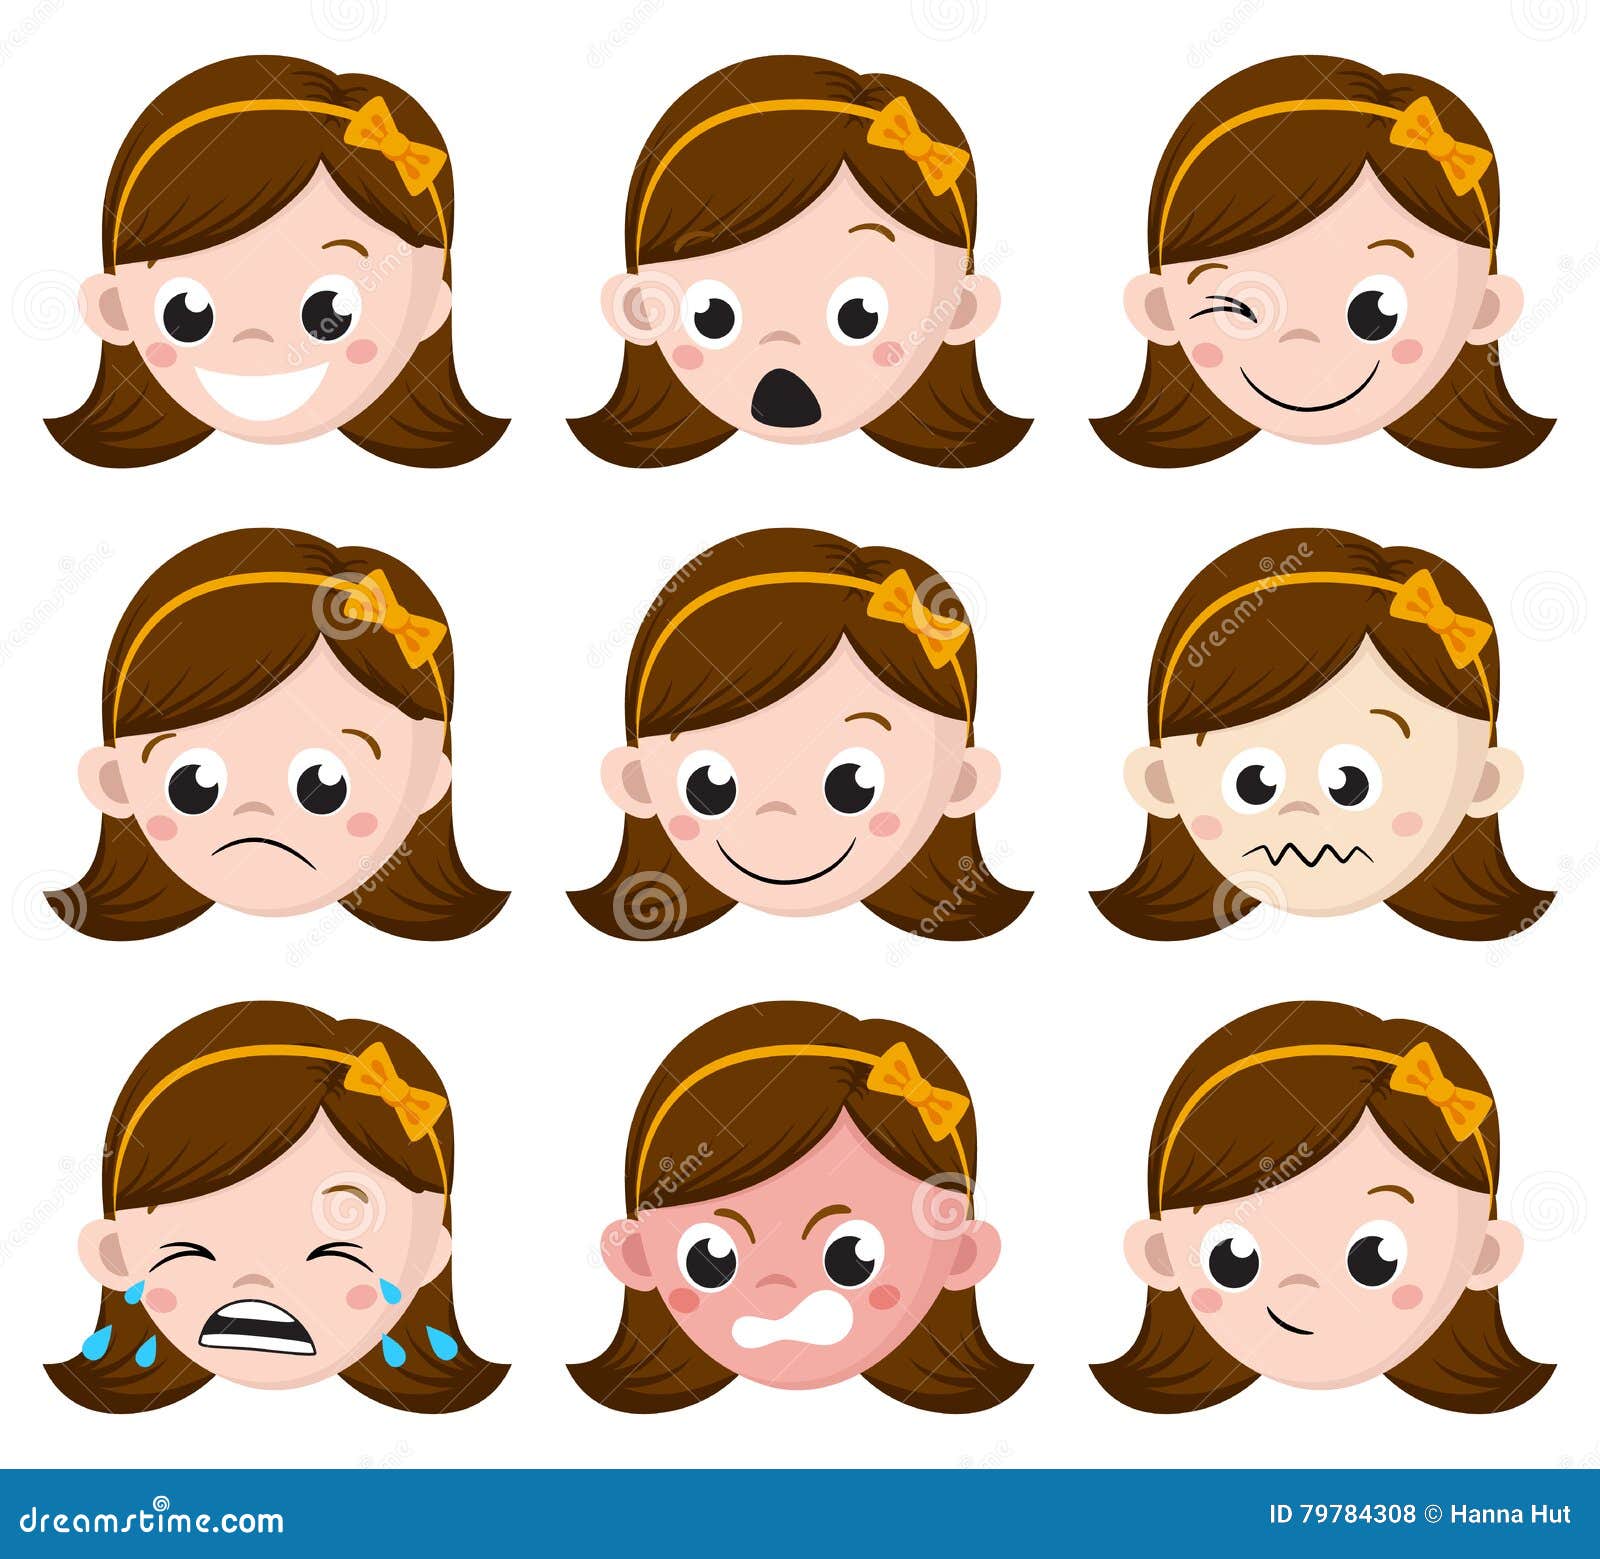 girl emotion faces cartoon. set of female avatar expressions.